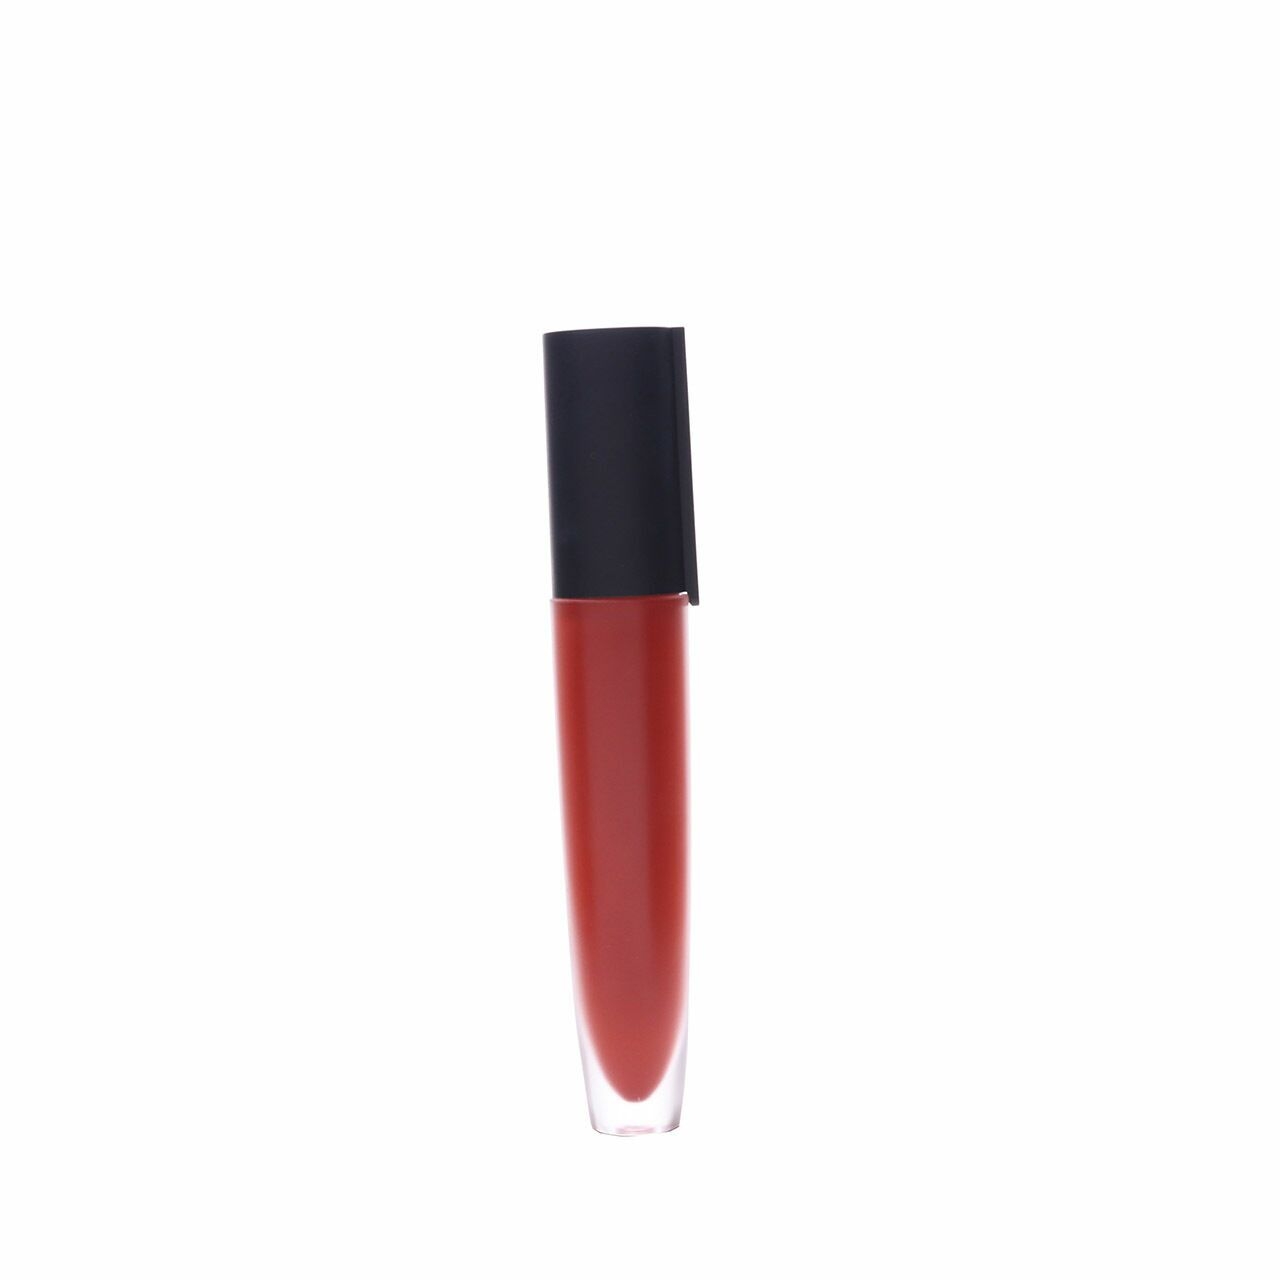 L'Oreal Rouge Signature Matte 138 Honored Lips